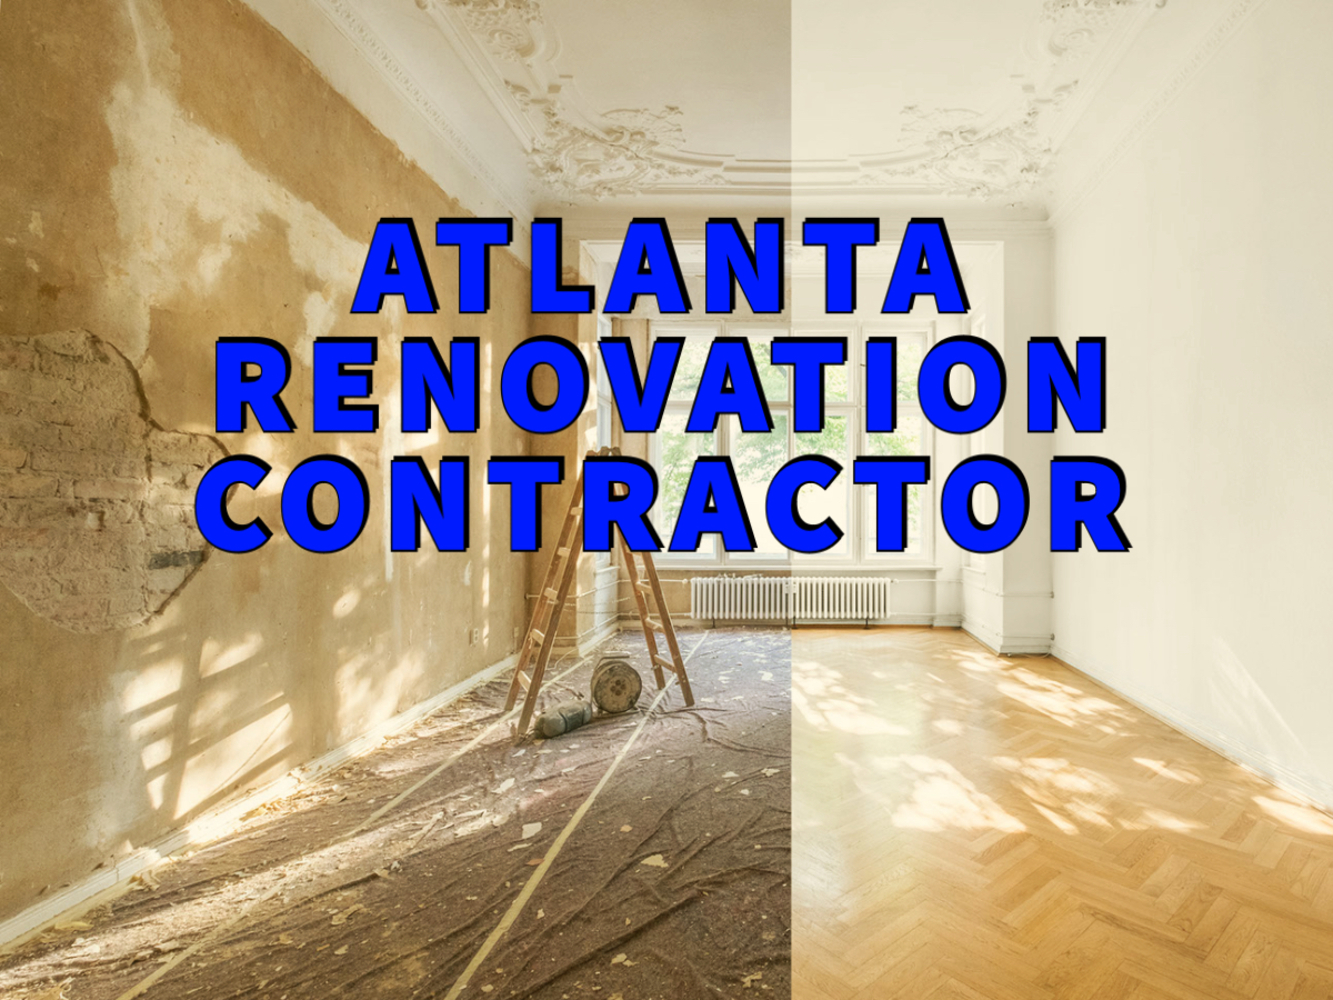 Atlanta renovation contractor written over split screen showing sunlit room before and after renovation